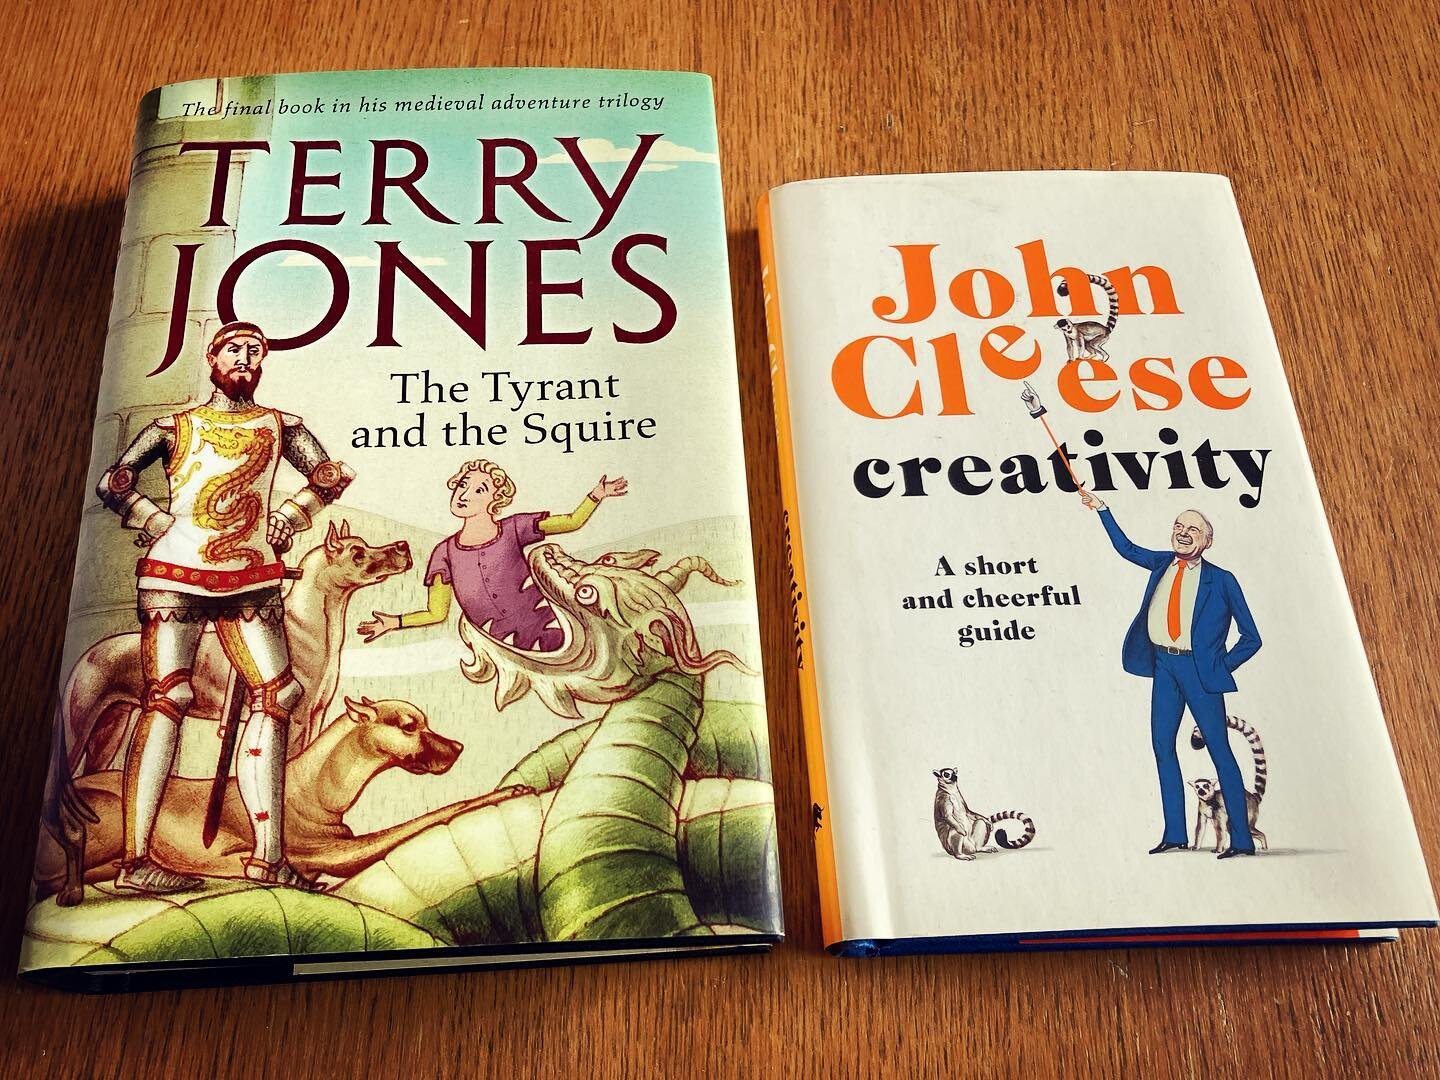 My book covers for Terry Jones and @johncleeseofficial. I&rsquo;m here for you @michael.palin